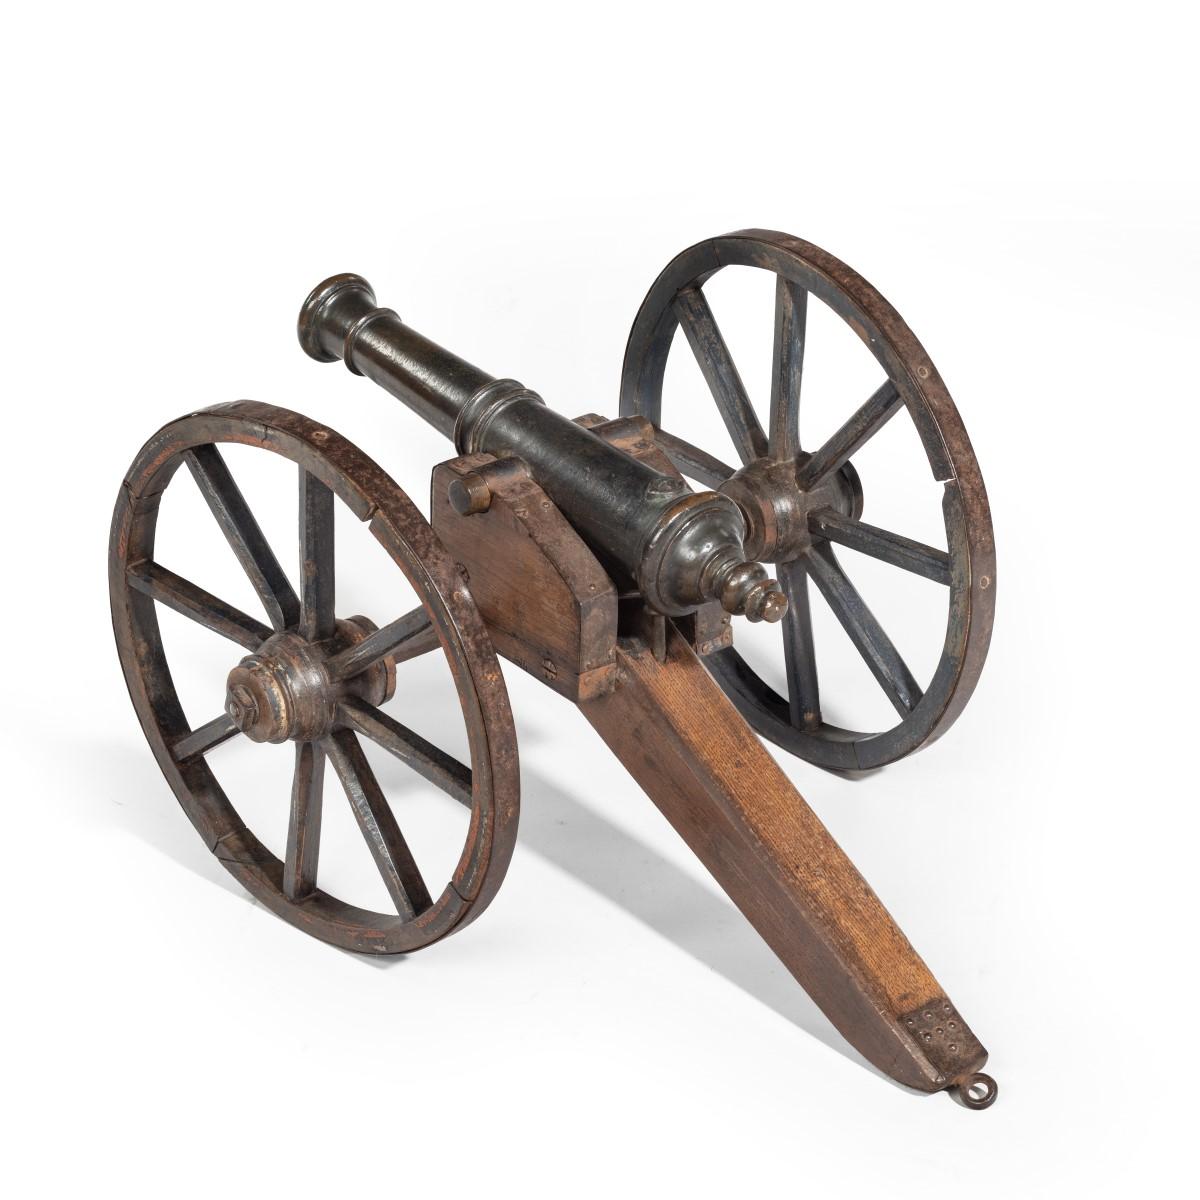 A mid-Victorian model of a field cannon, the bronze barrel set on an oak carriage with large iron-bound wheels, with traces of the original black, red and white paint. English, circa 1875.